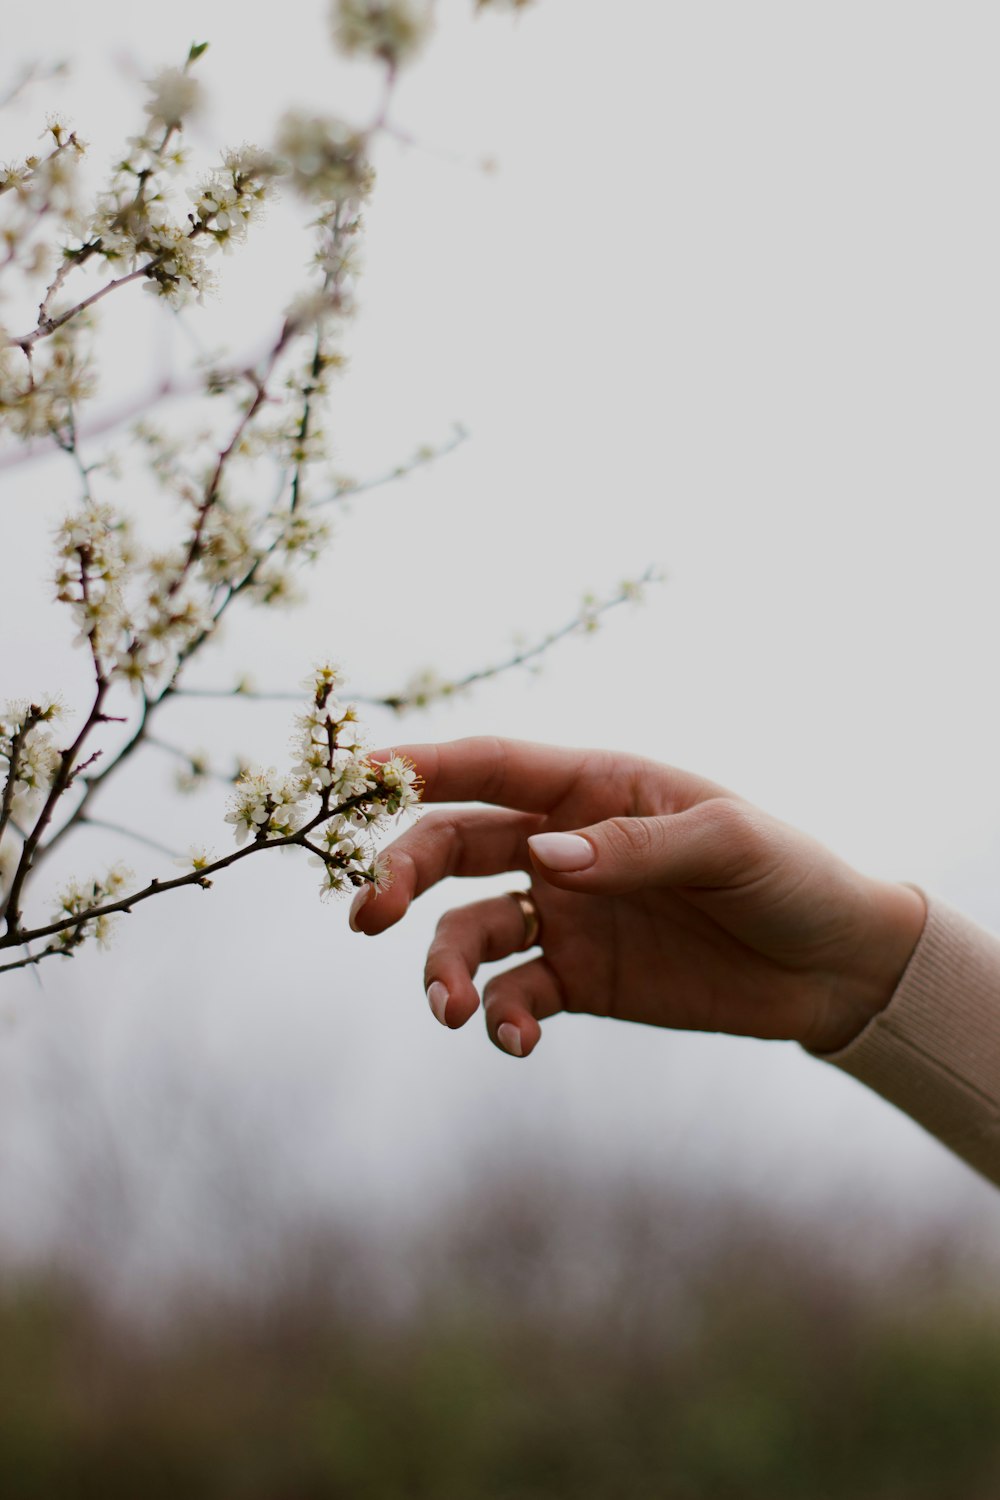 a hand reaching for a branch with white flowers